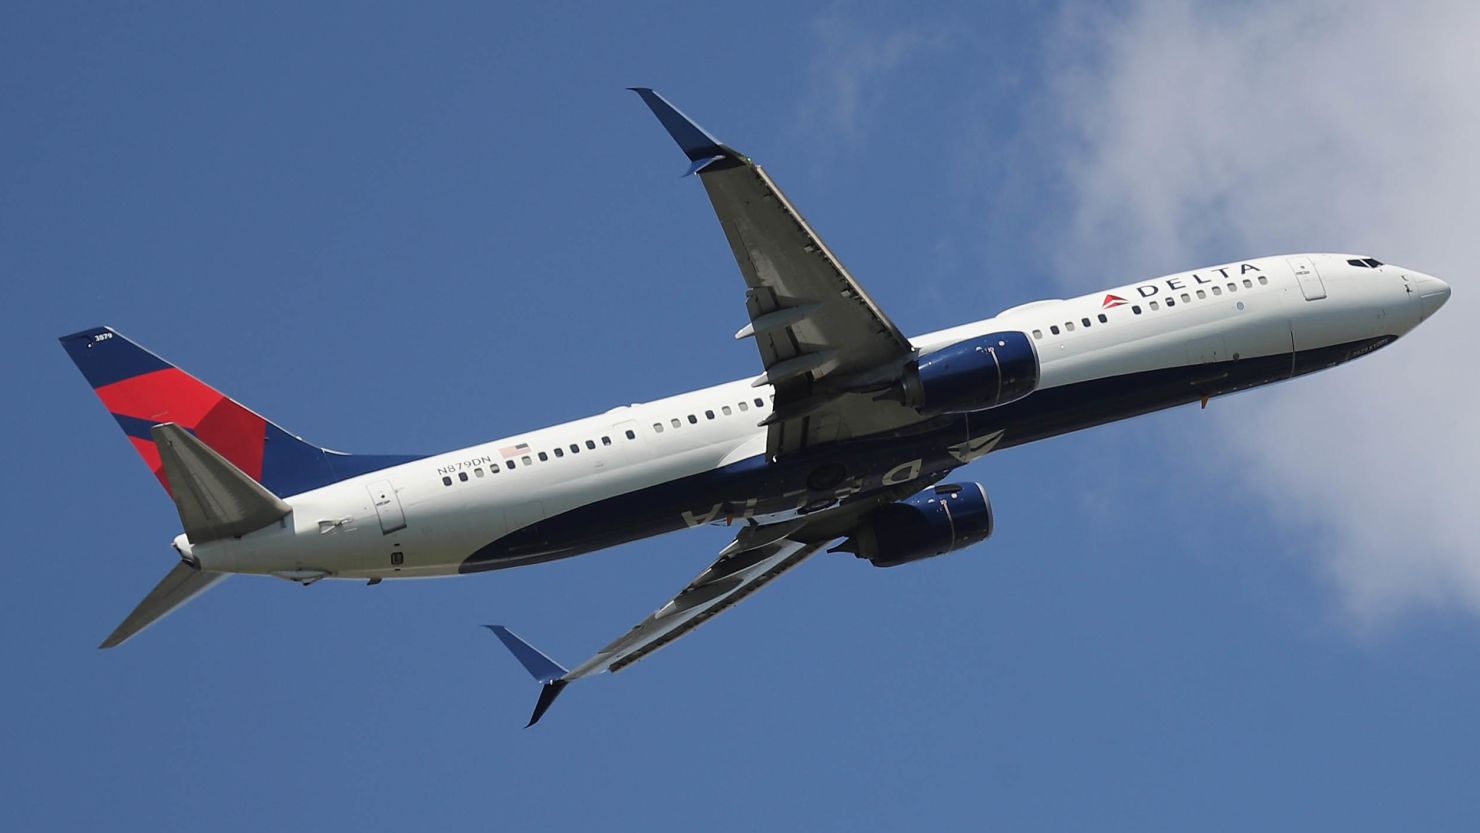 Delta Air Lines is paying a $50,000 fine to settle allegations it discriminated against Muslim passengers.